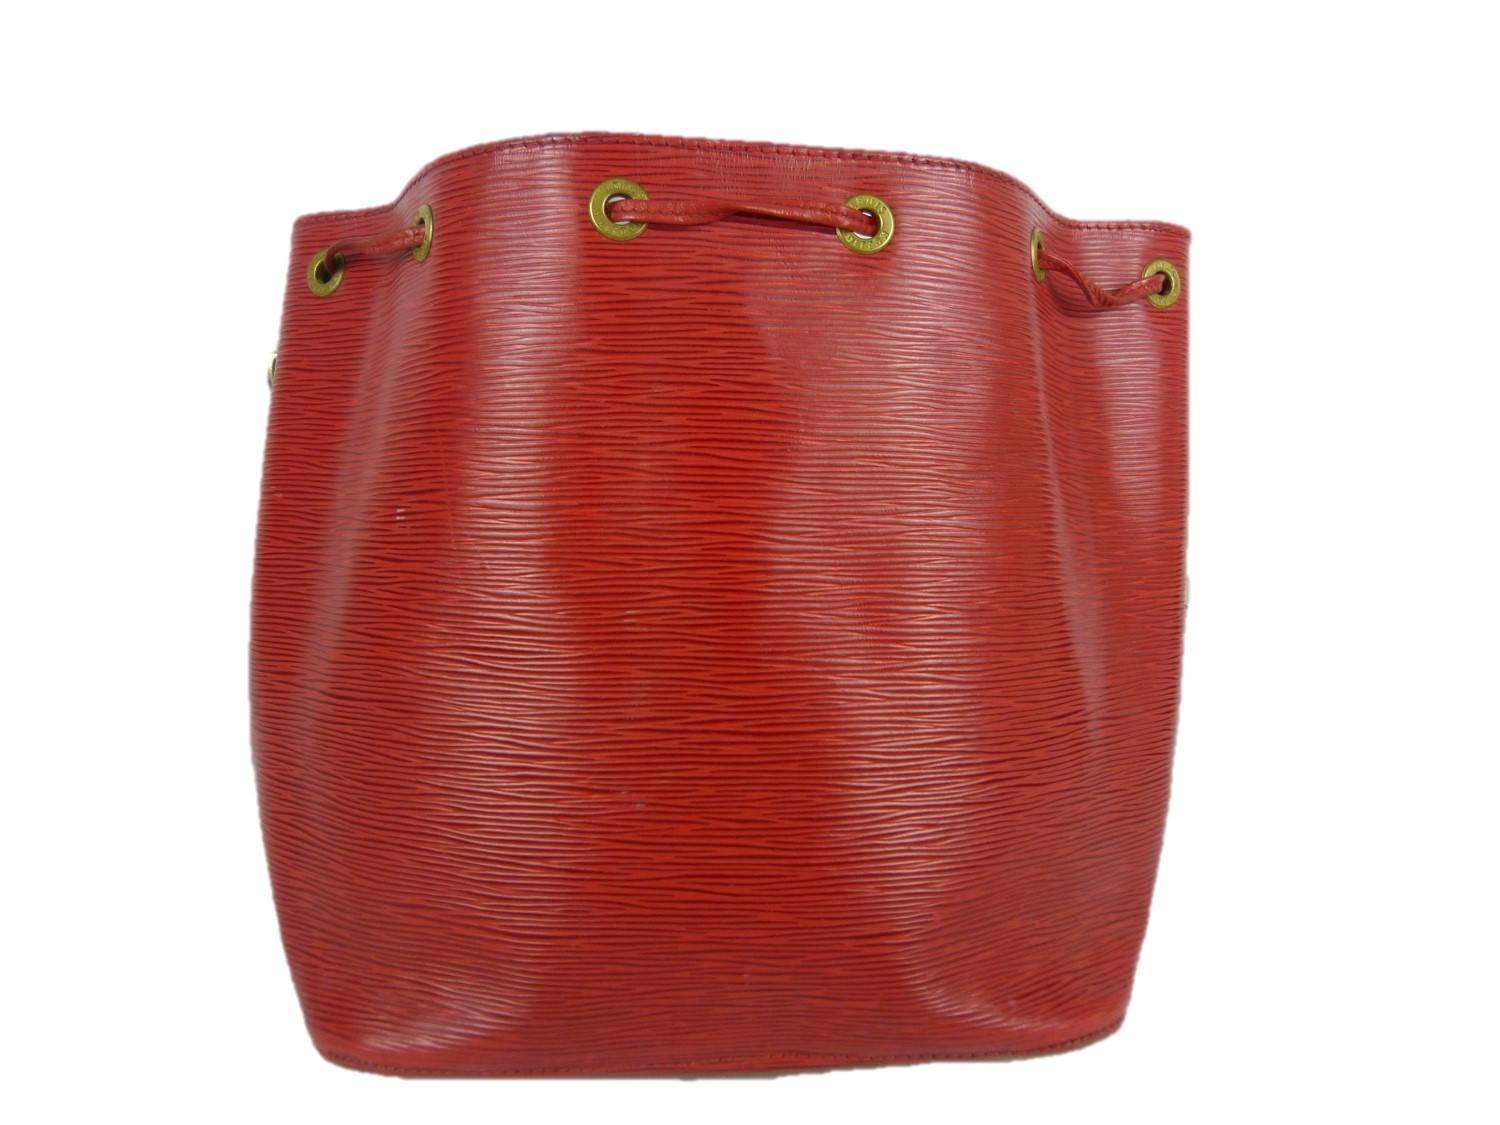 Beautiful Louis Vuitton Petit Noé shoulder bag in red epi leather. 
This bag is perfec for every season !
Some sign of wear on both side of the bag (see photos)
Interior in really good shape.
Delivered with the certificate of authentification